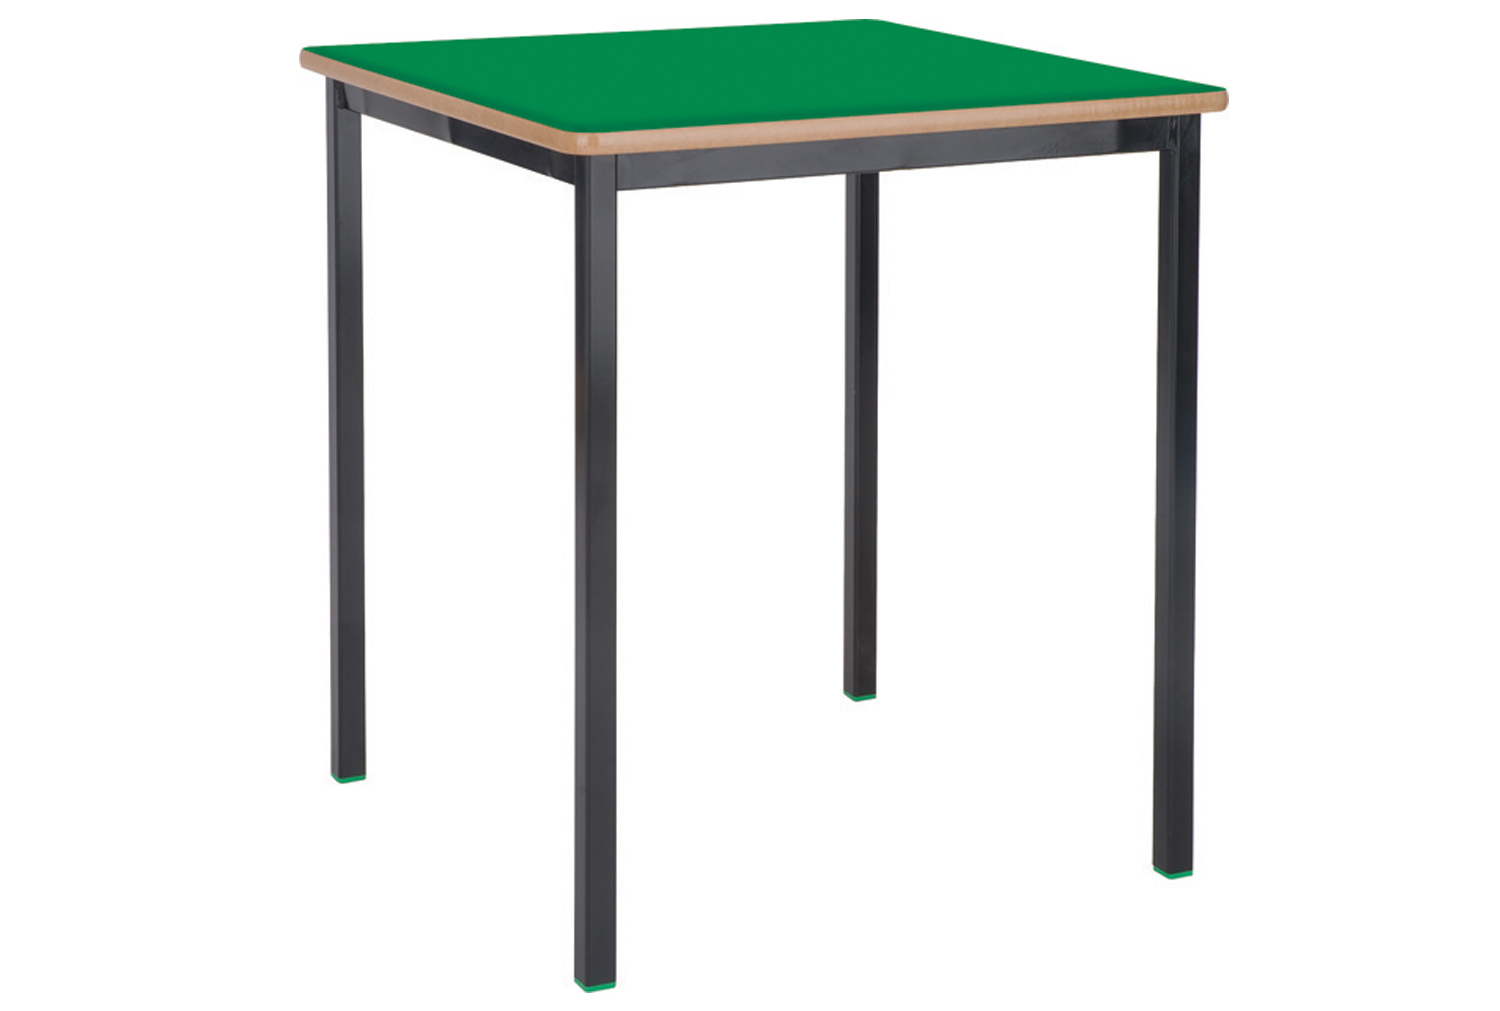 Qty 5 - Square Fully Welded Classroom Tables 4-6 Years, 55wx55dx53h (cm), Light Grey, Blue Top, MDF Beech Edge